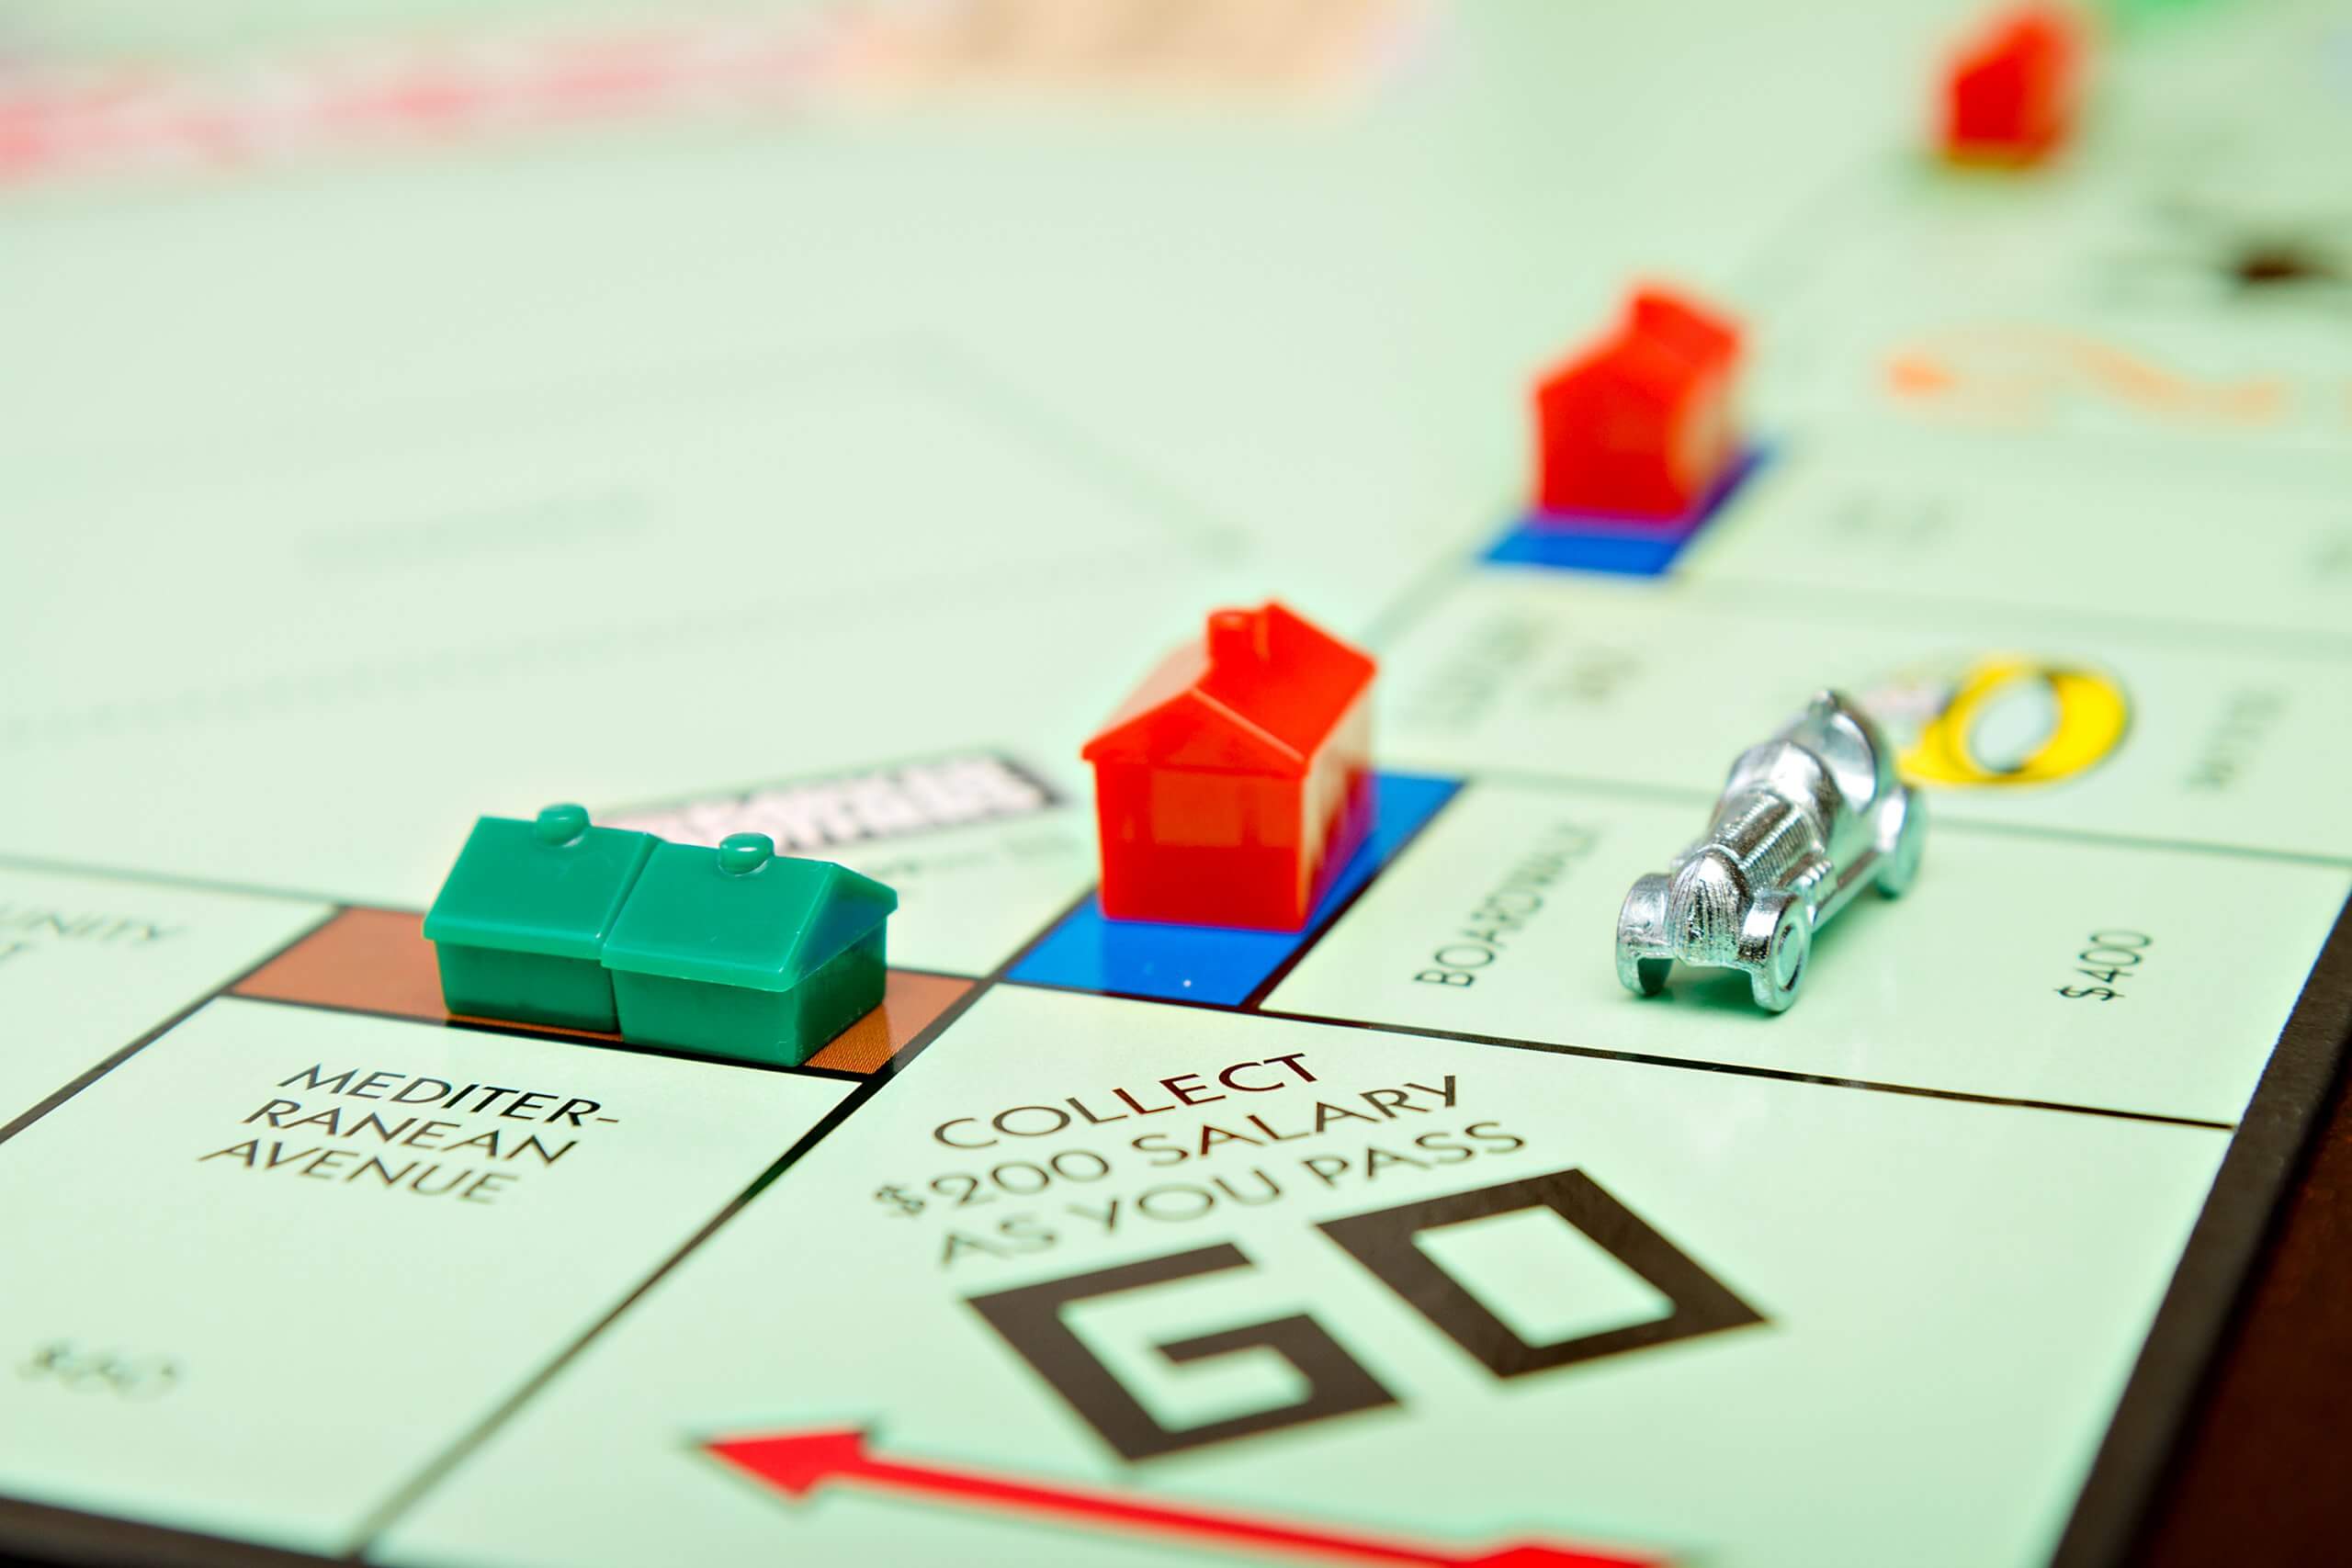 Business Monopoly - Complete Controller